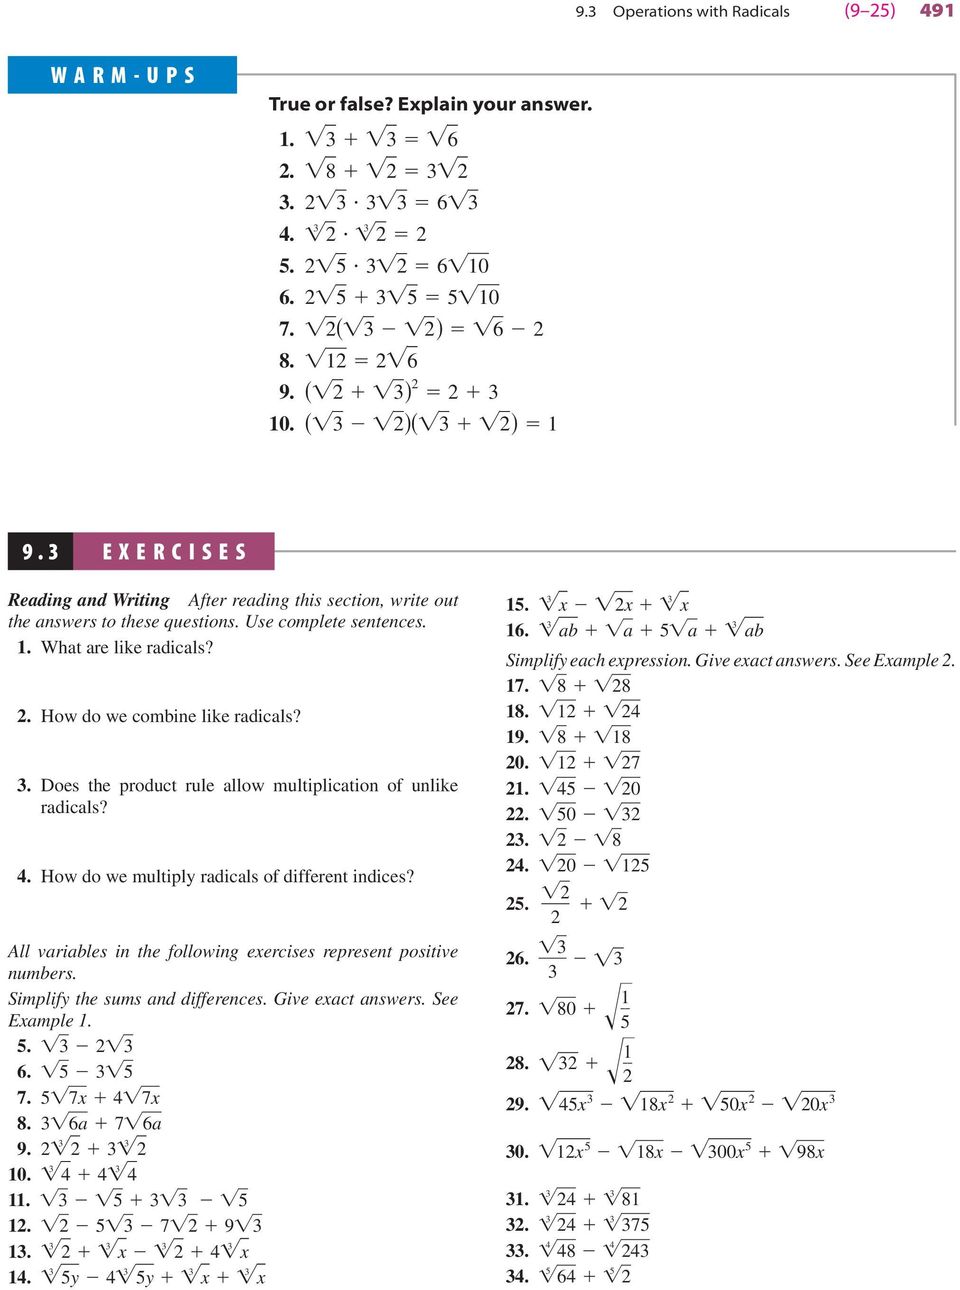 . Does the product rule allow multiplication of unlike radicals?. How do we multiply radicals of different indices? All variables in the following eercises represent positive numbers.